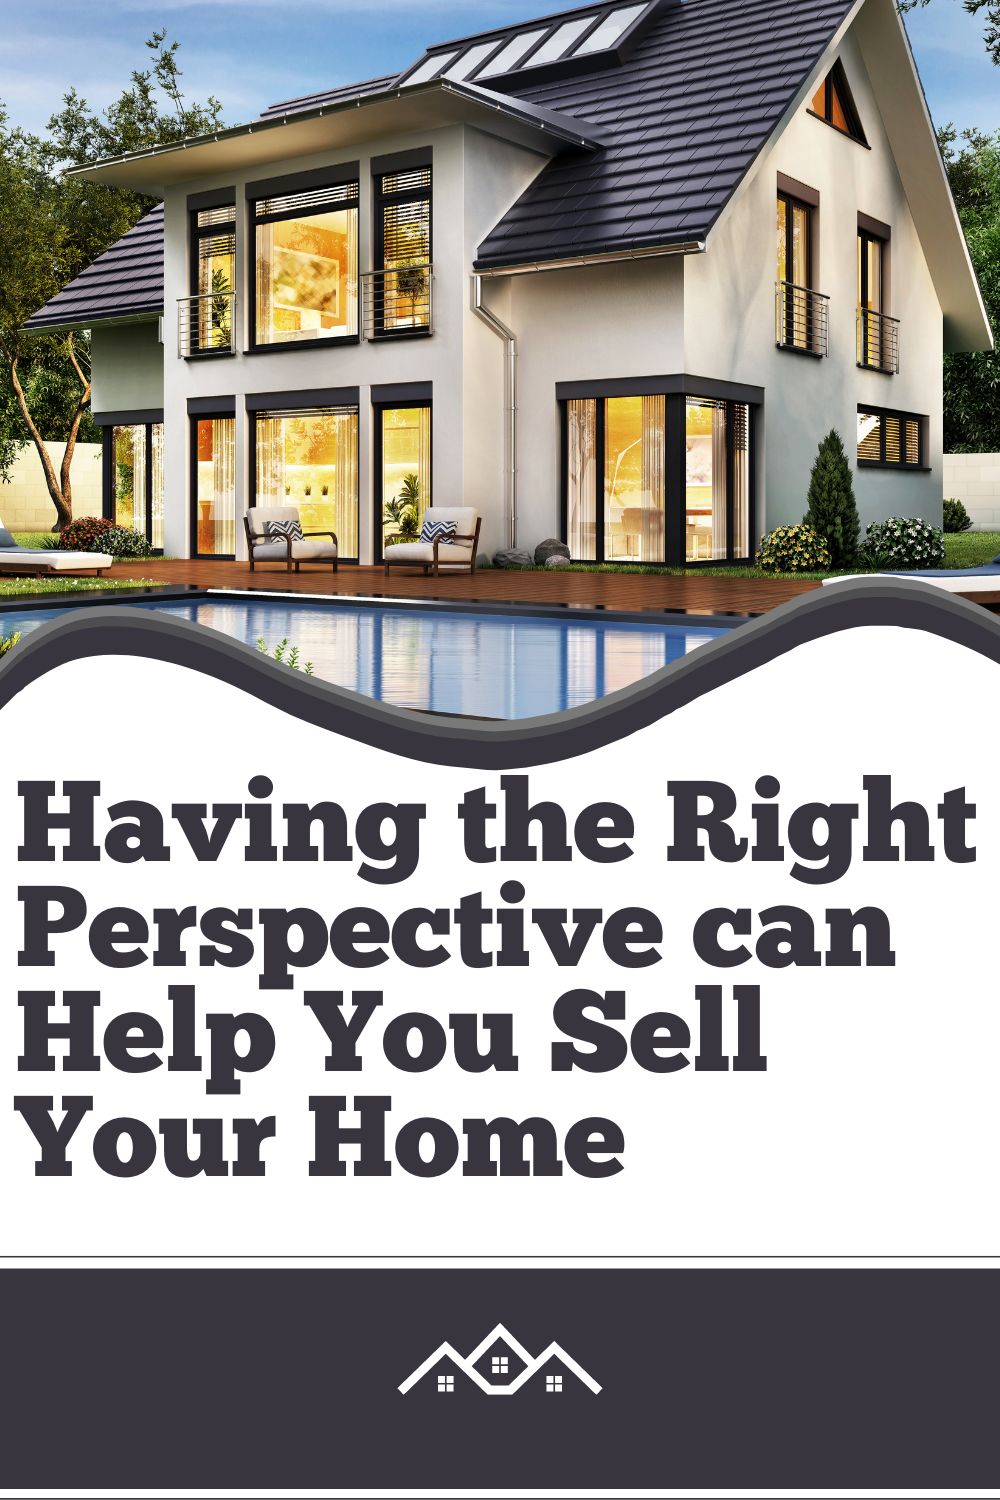 Having the Right Perspective can Help You Sell Your Home